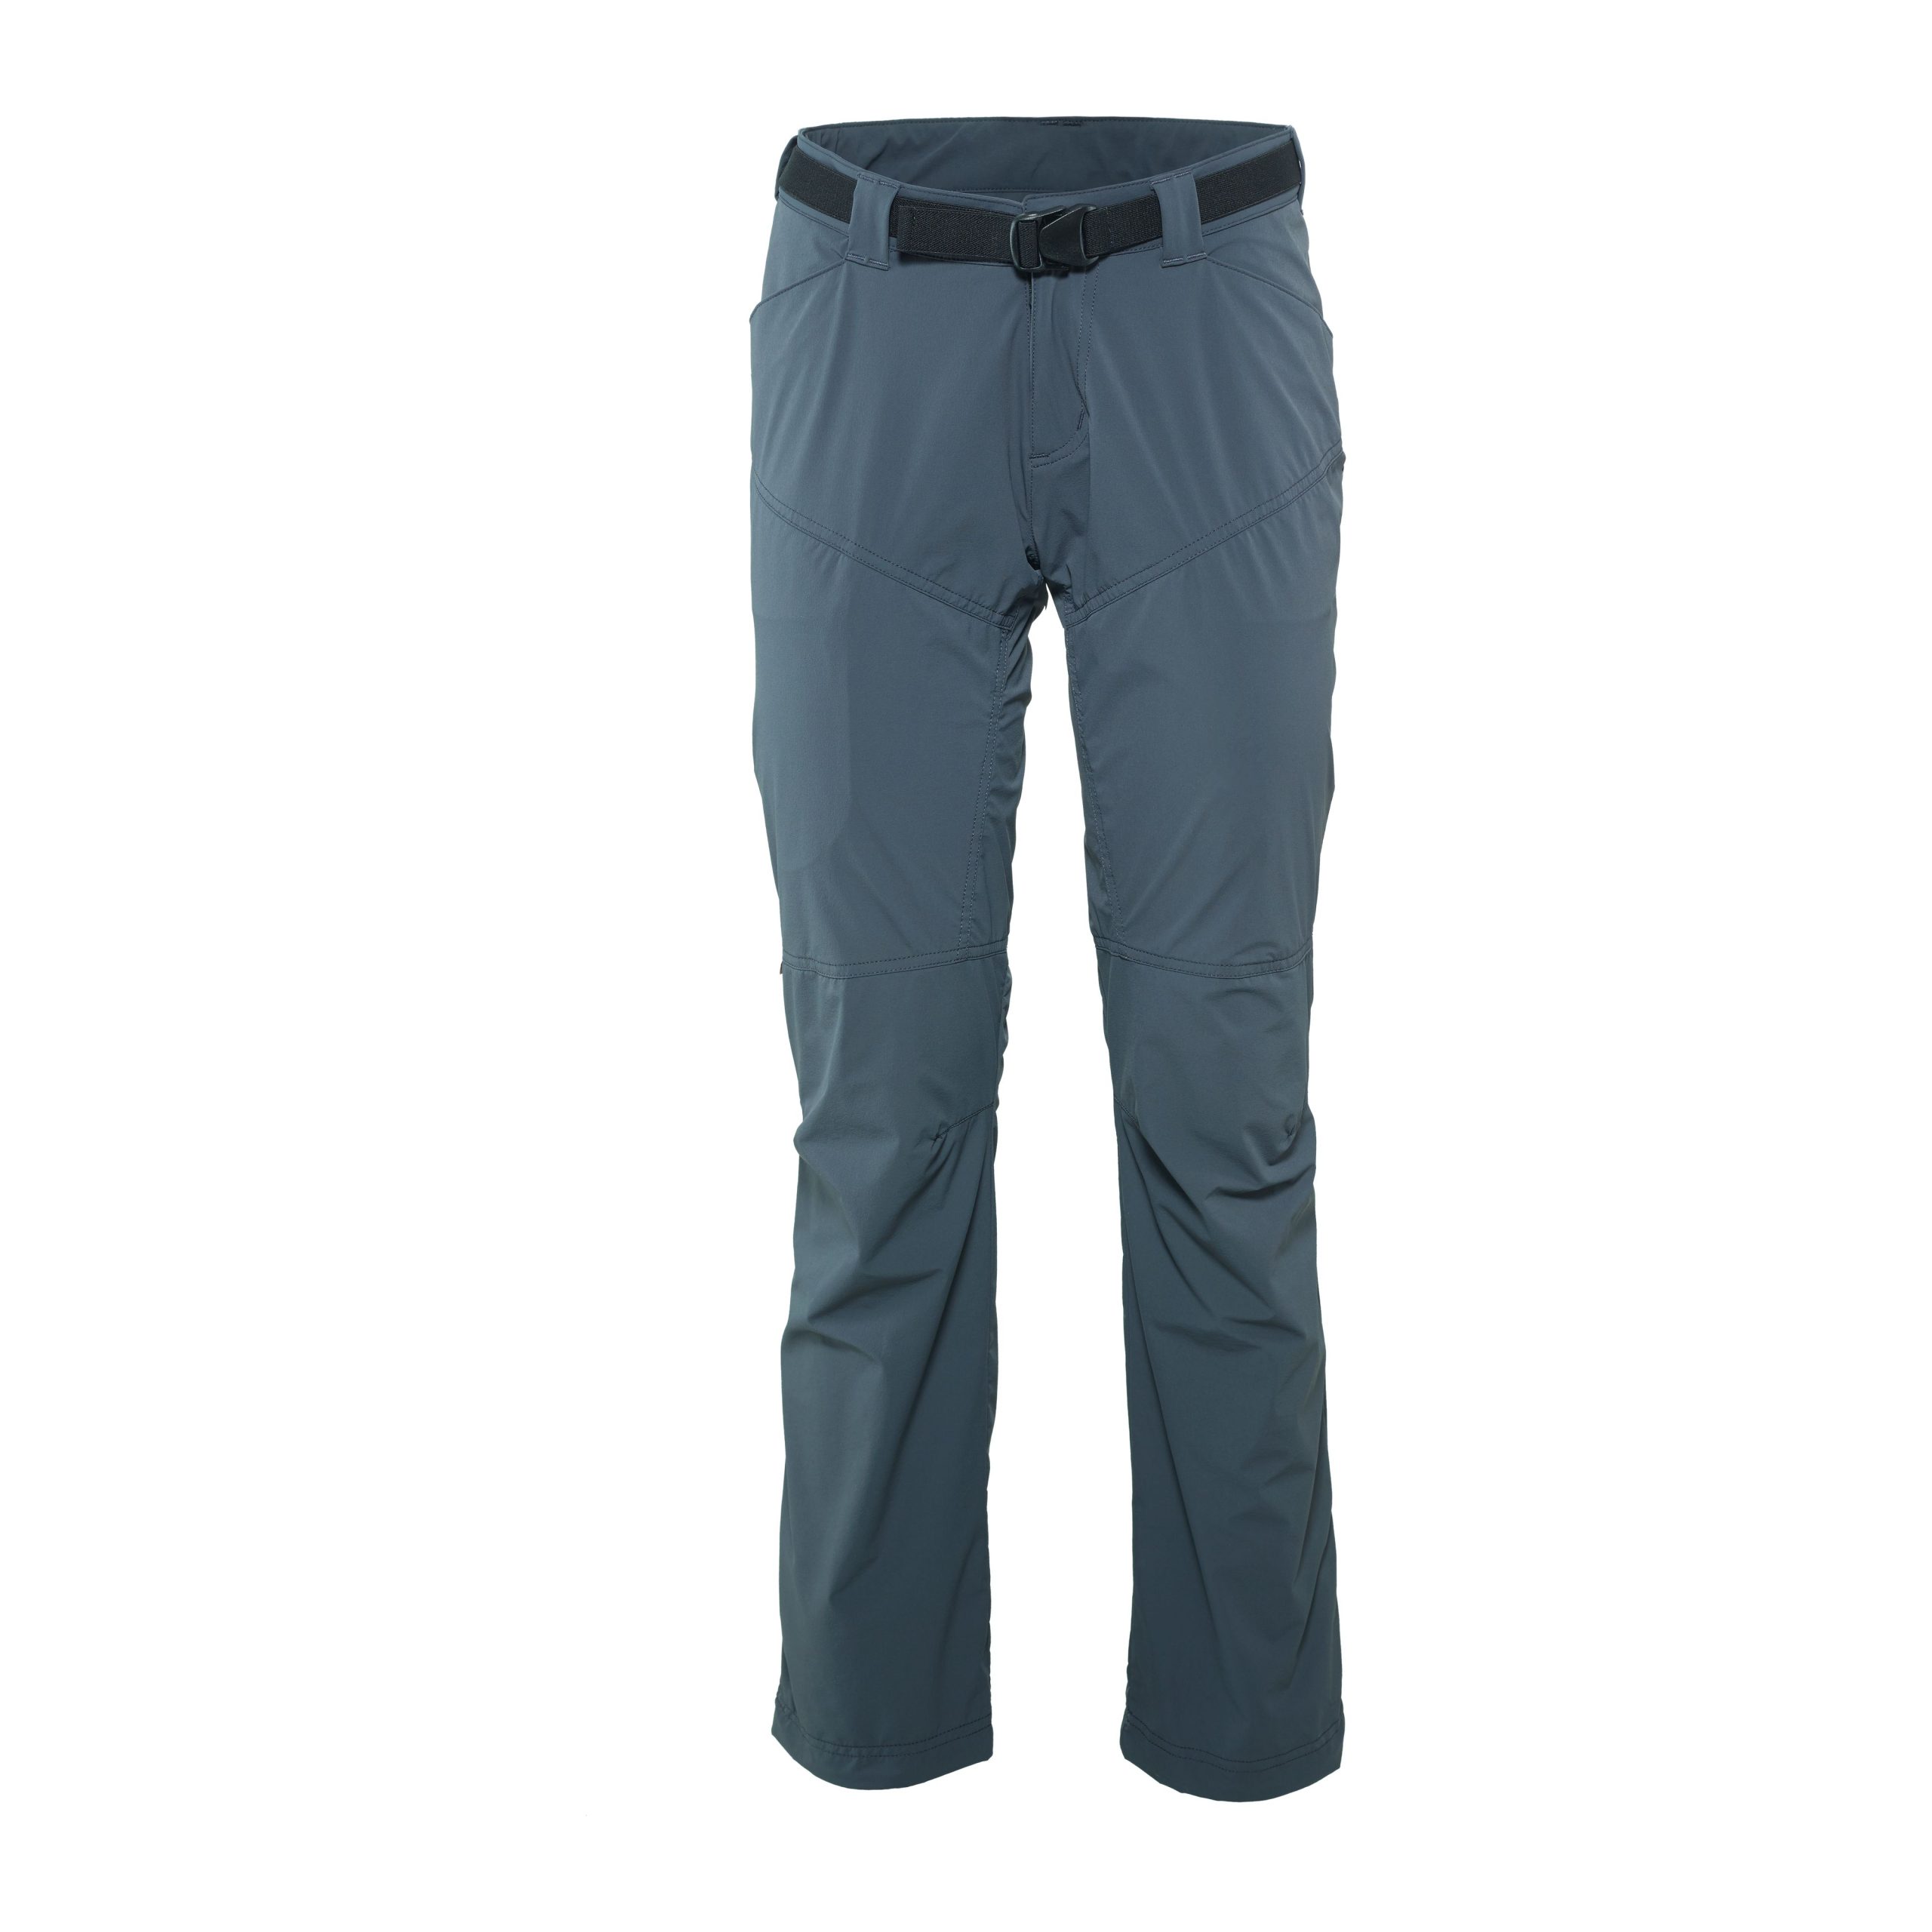 Loop Womens Stalo Stretch Pants - Pacific Rivers Outfitting Company